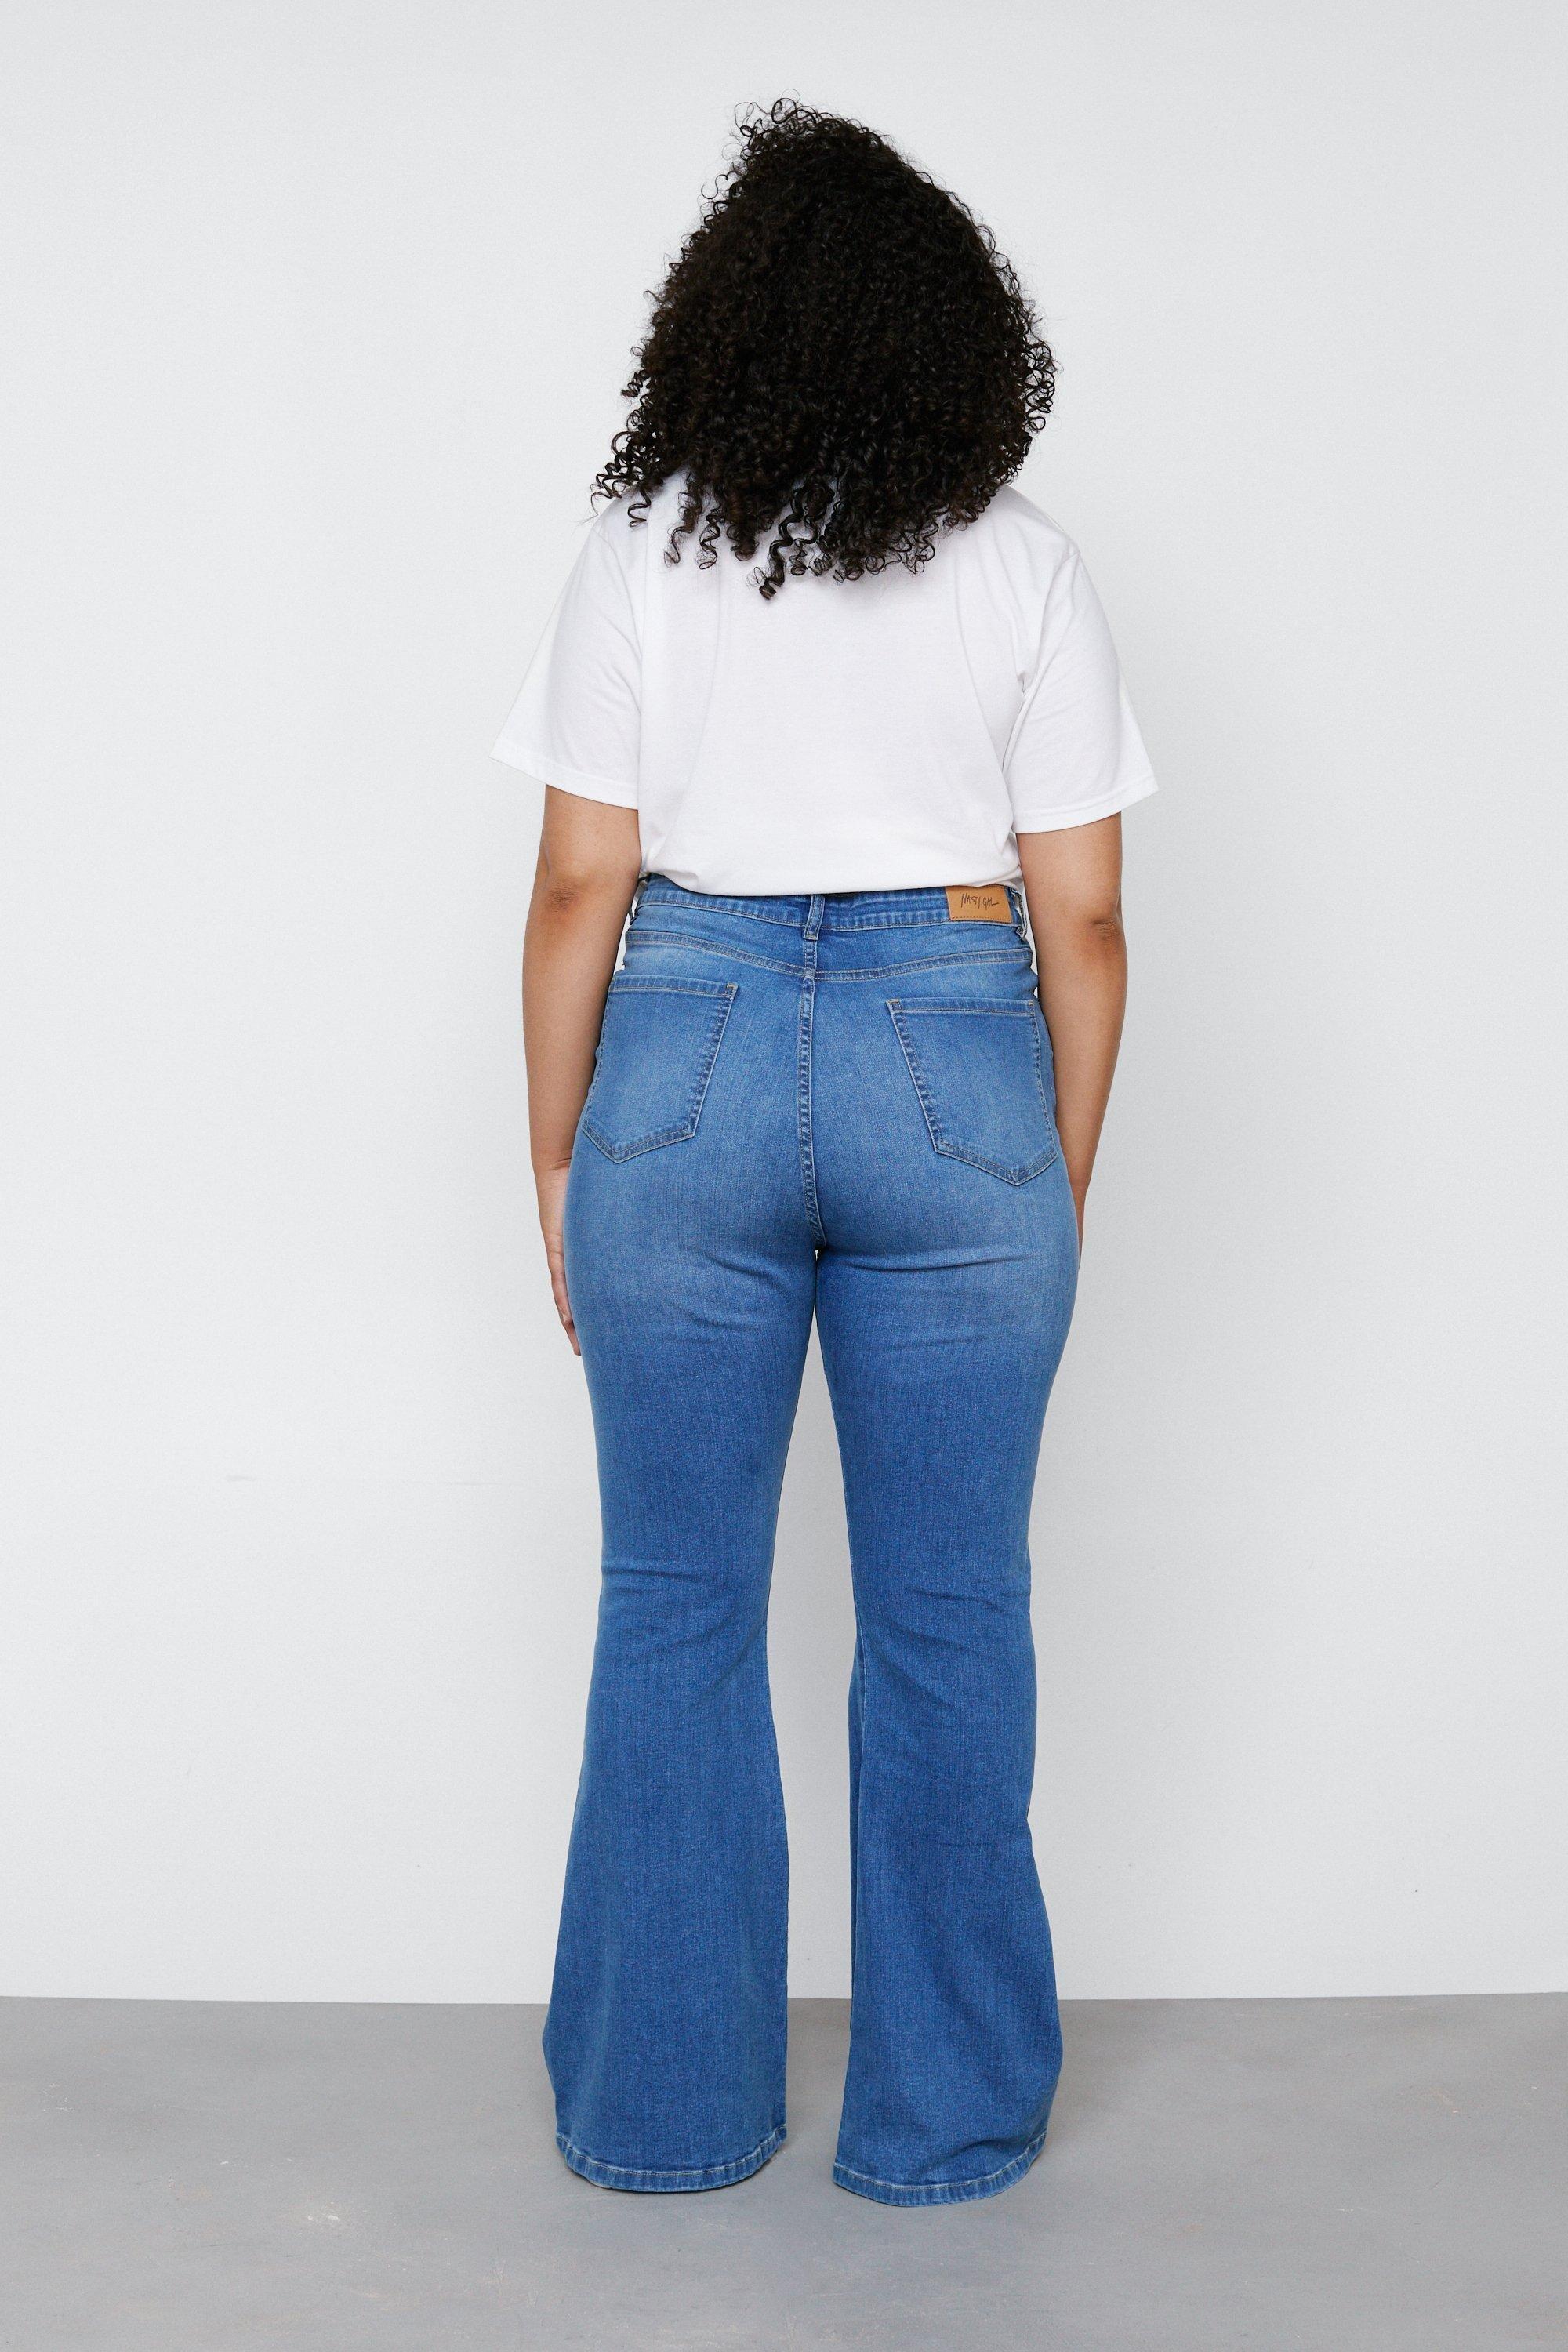 How to Style Flare / Bell Bottom Jeans - Foreign Fresh & Fierce